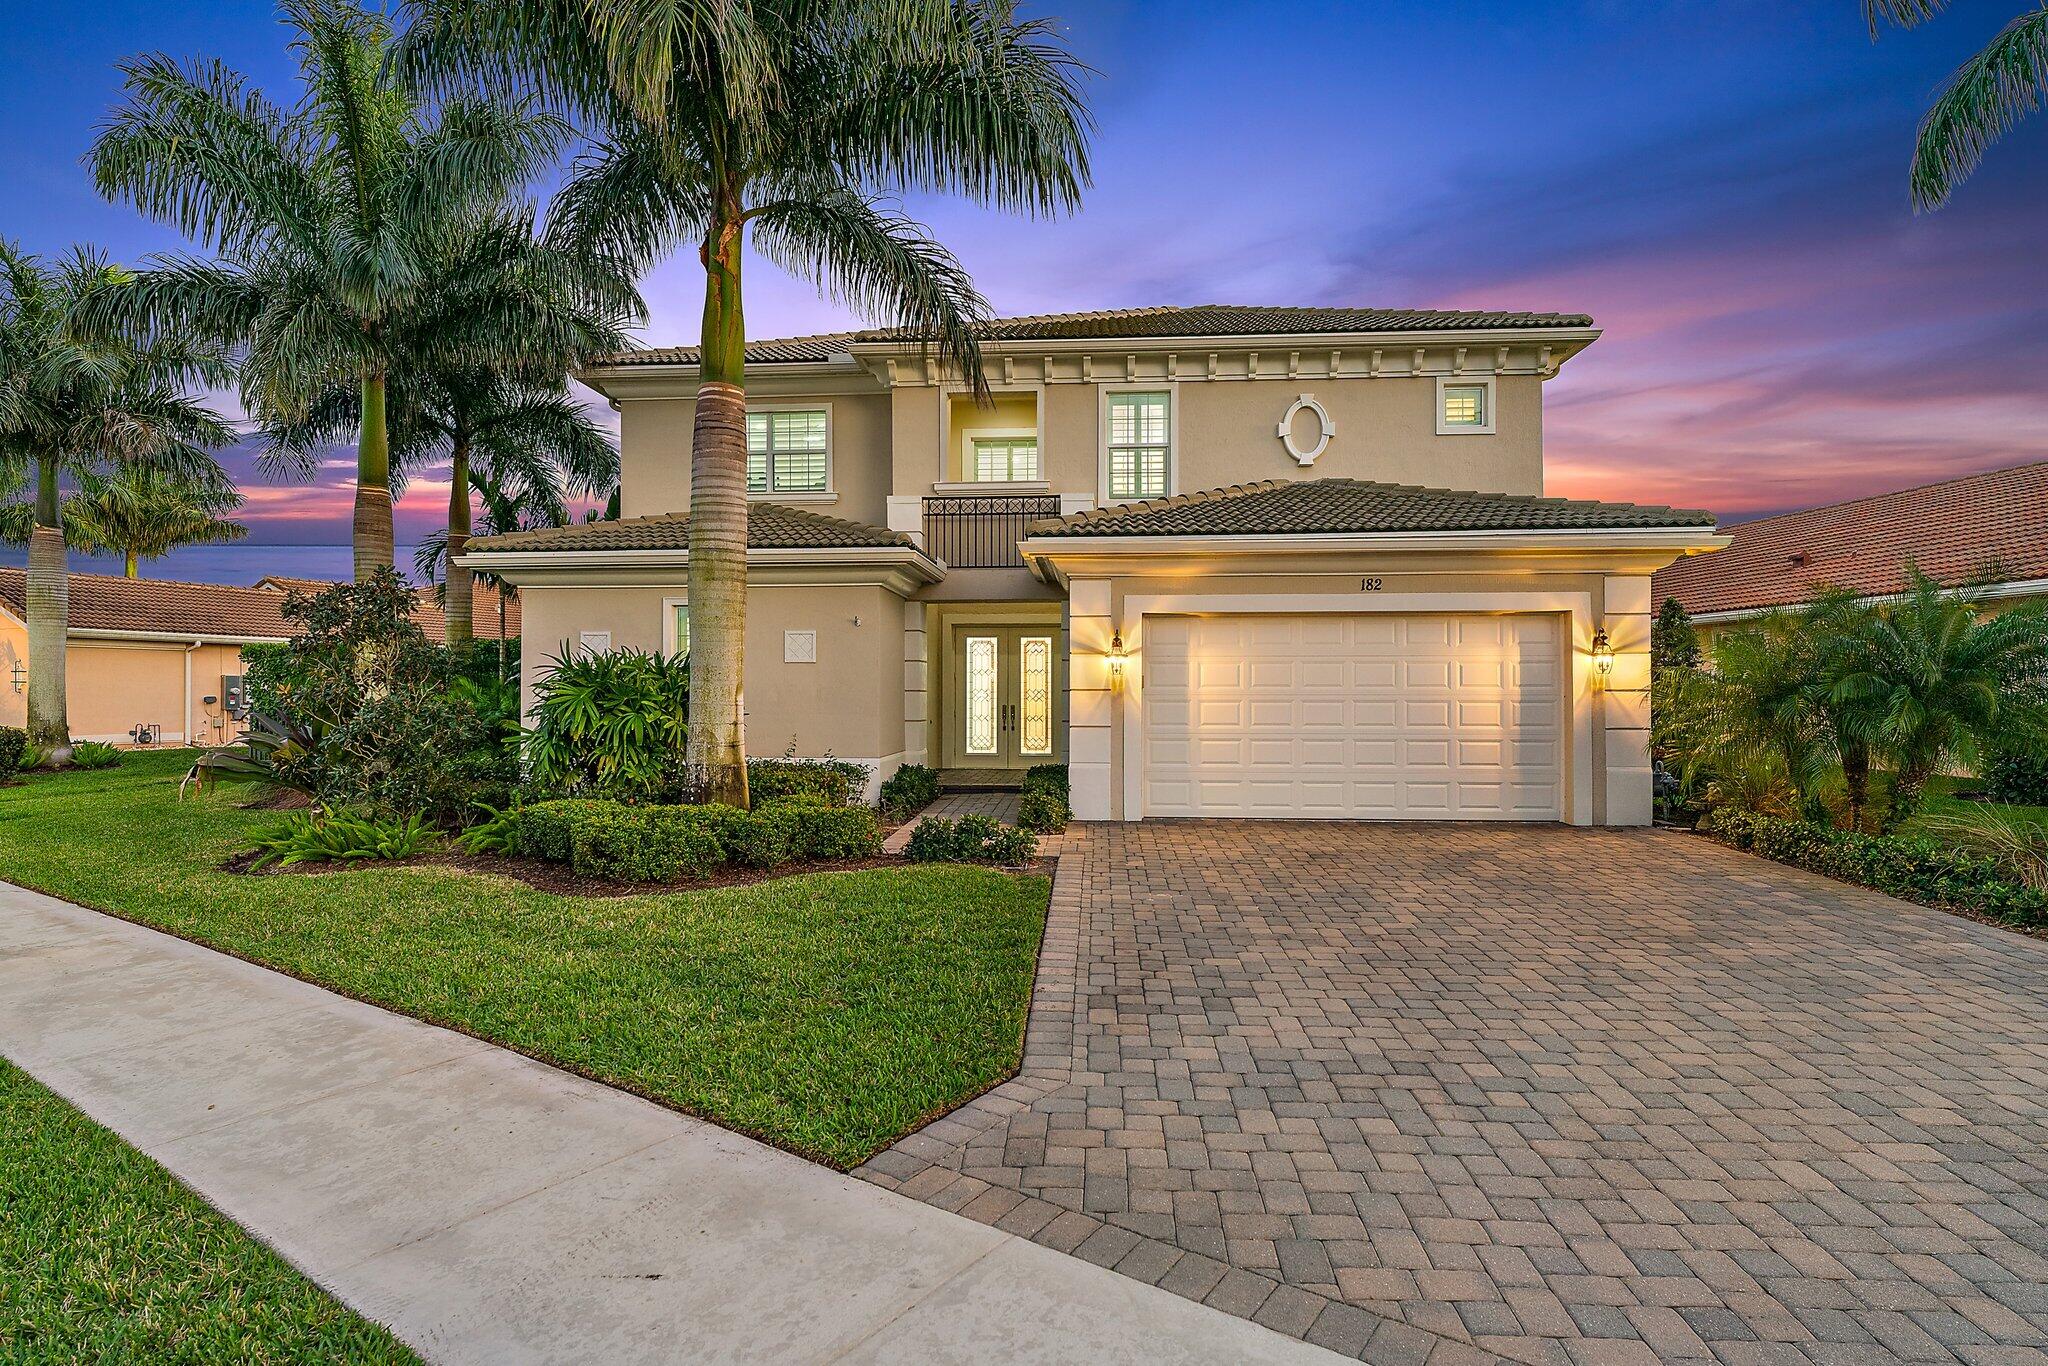 This beautiful modern home sits on the best waterfront lot in Jupiter Country Club! With full privacy, this tropical paradise is an entertainer's dream. A full summer kitchen, expansive patio, large pool with spa and automatic roll down screen enclosures allows you to enjoy this huge backyard year round. Walk through the front doors to an open floor plan layout with many upgrades including plantation shutters, beamed ceiling, crown molding, a massive kitchen island, gas fireplace, impact windows & doors and much more. Located just minutes to shopping, dining, entertainment and beautiful beaches. This home has it all.